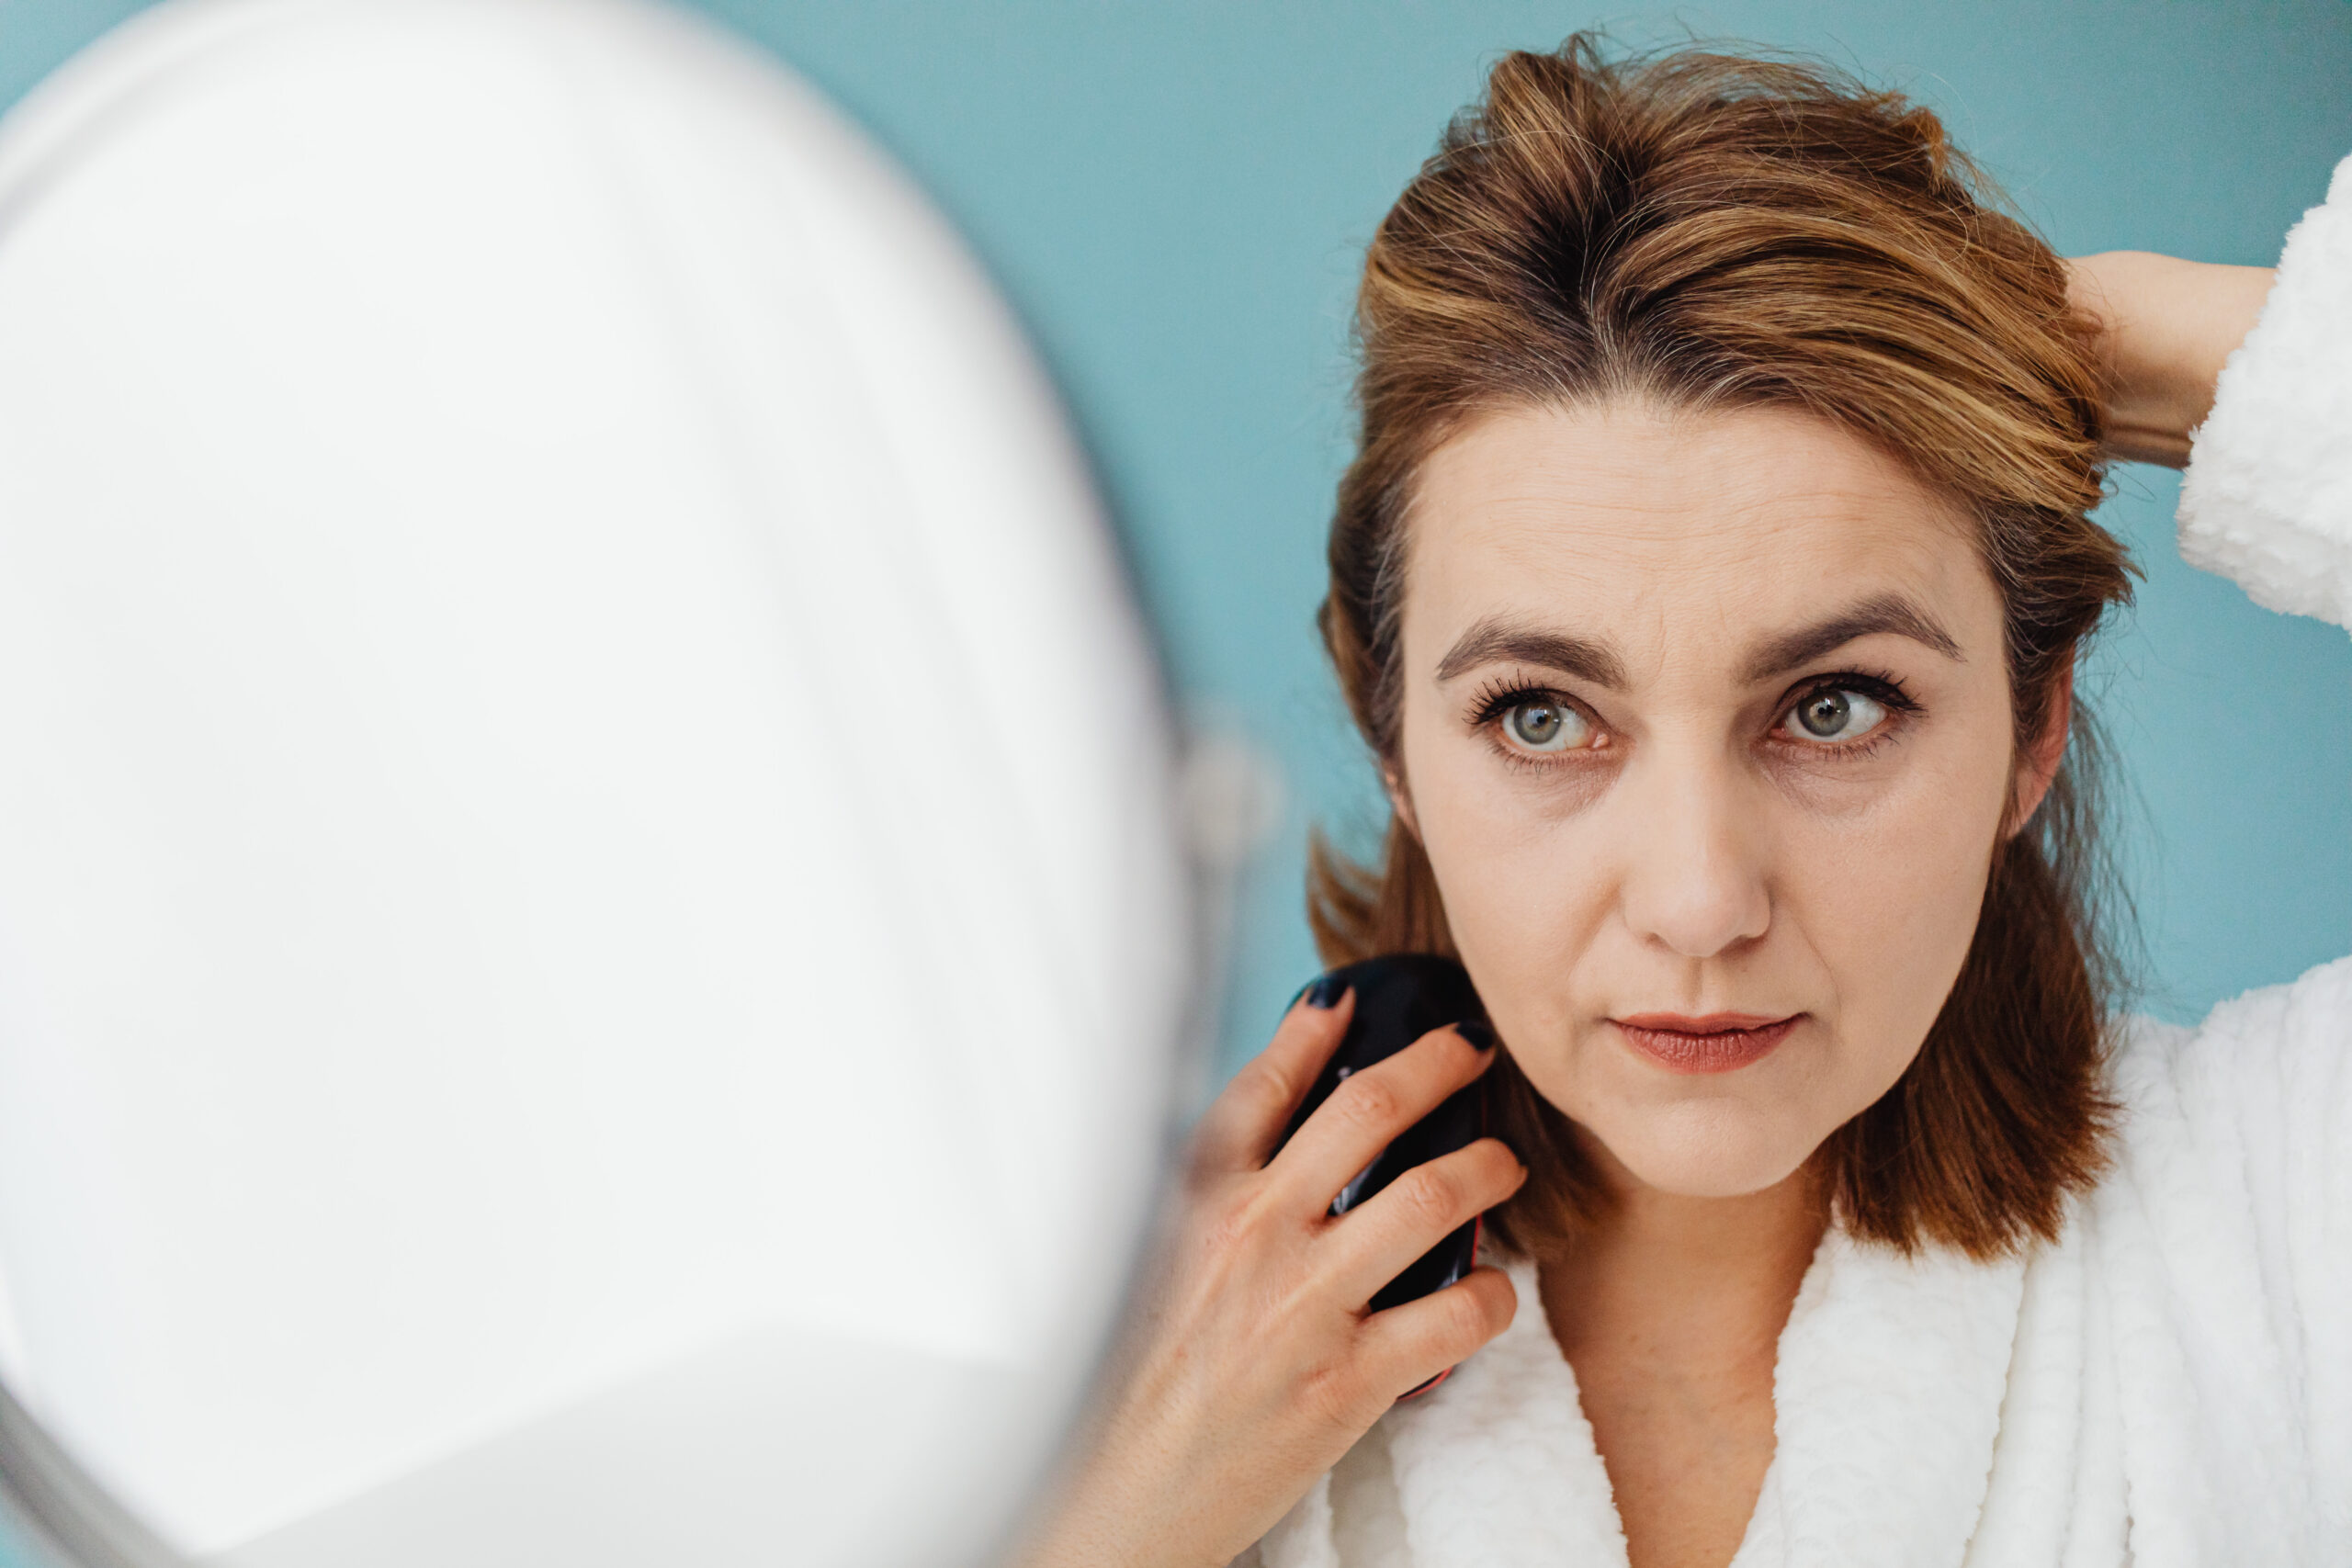 5 Tips for Managing Hair Loss with Medication